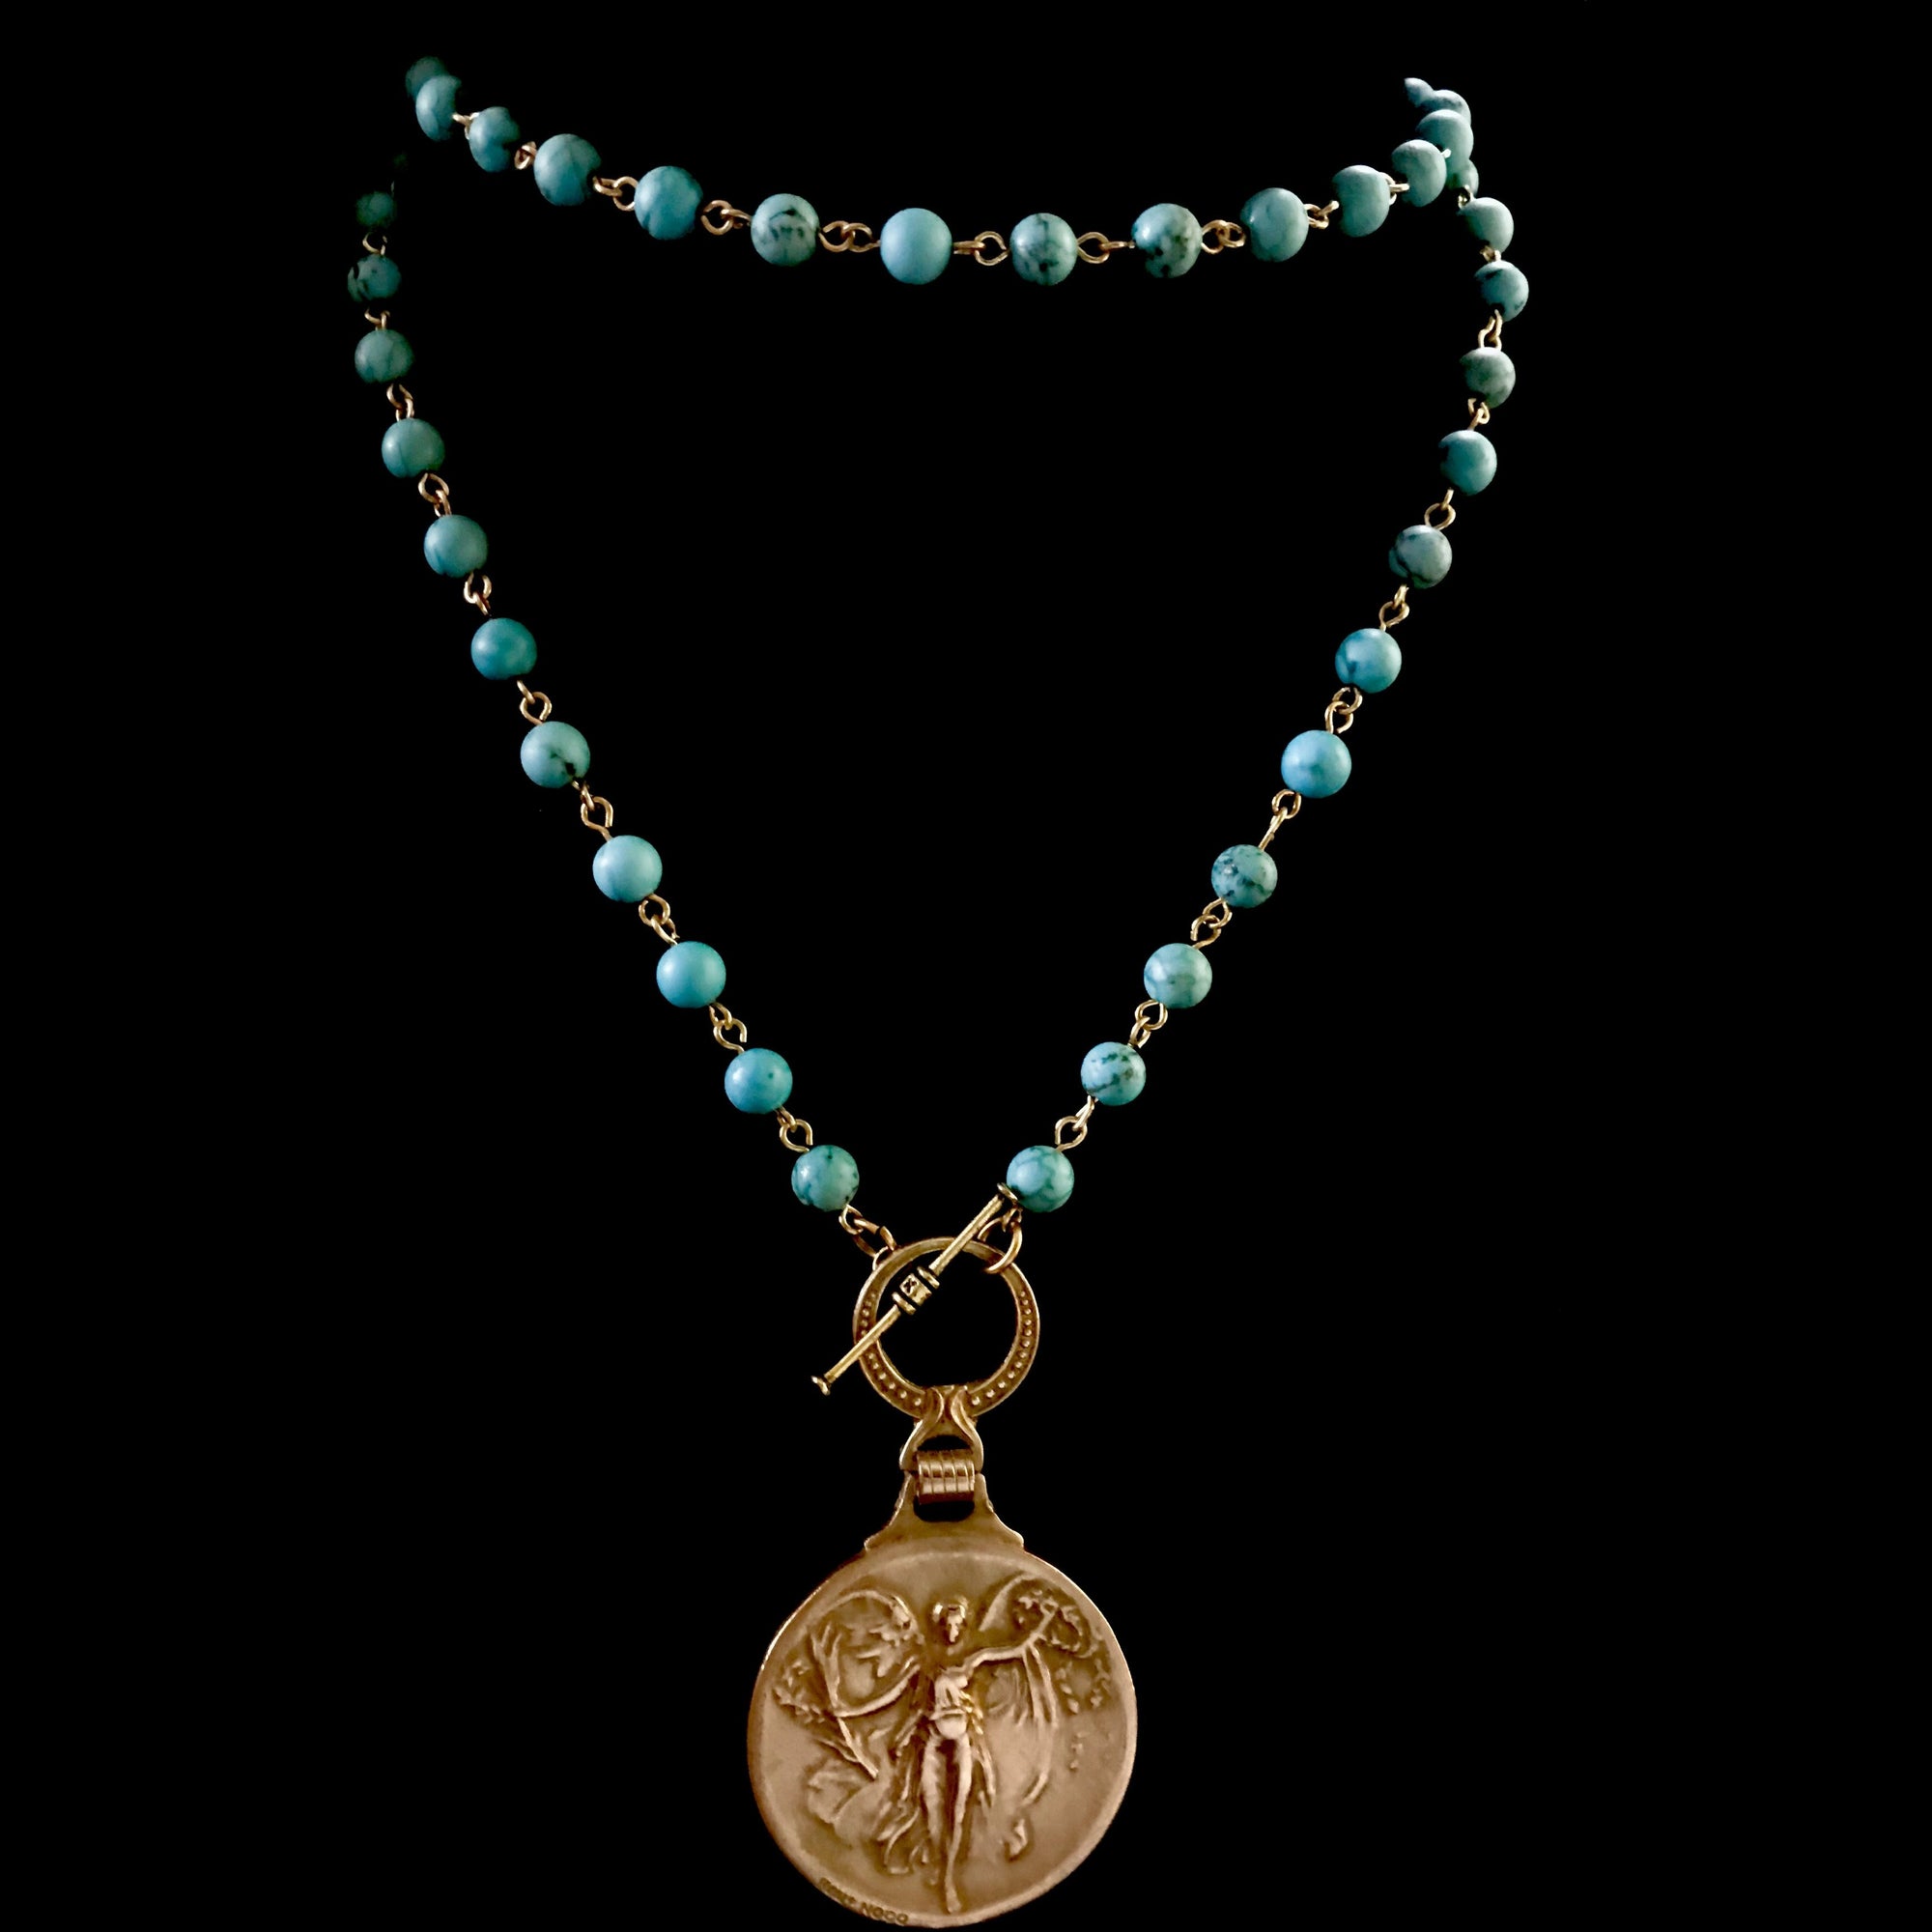 Nike the Goddess of Victory Turquoise and Gold Necklace - Whispering ...